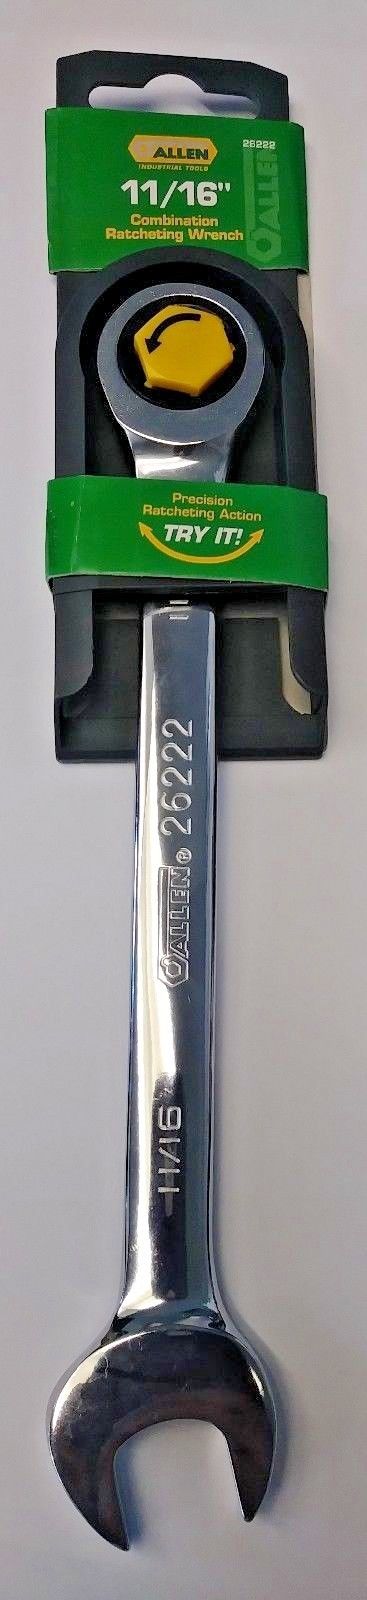 Allen 26222 11/16" Combination Ratcheting Wrench